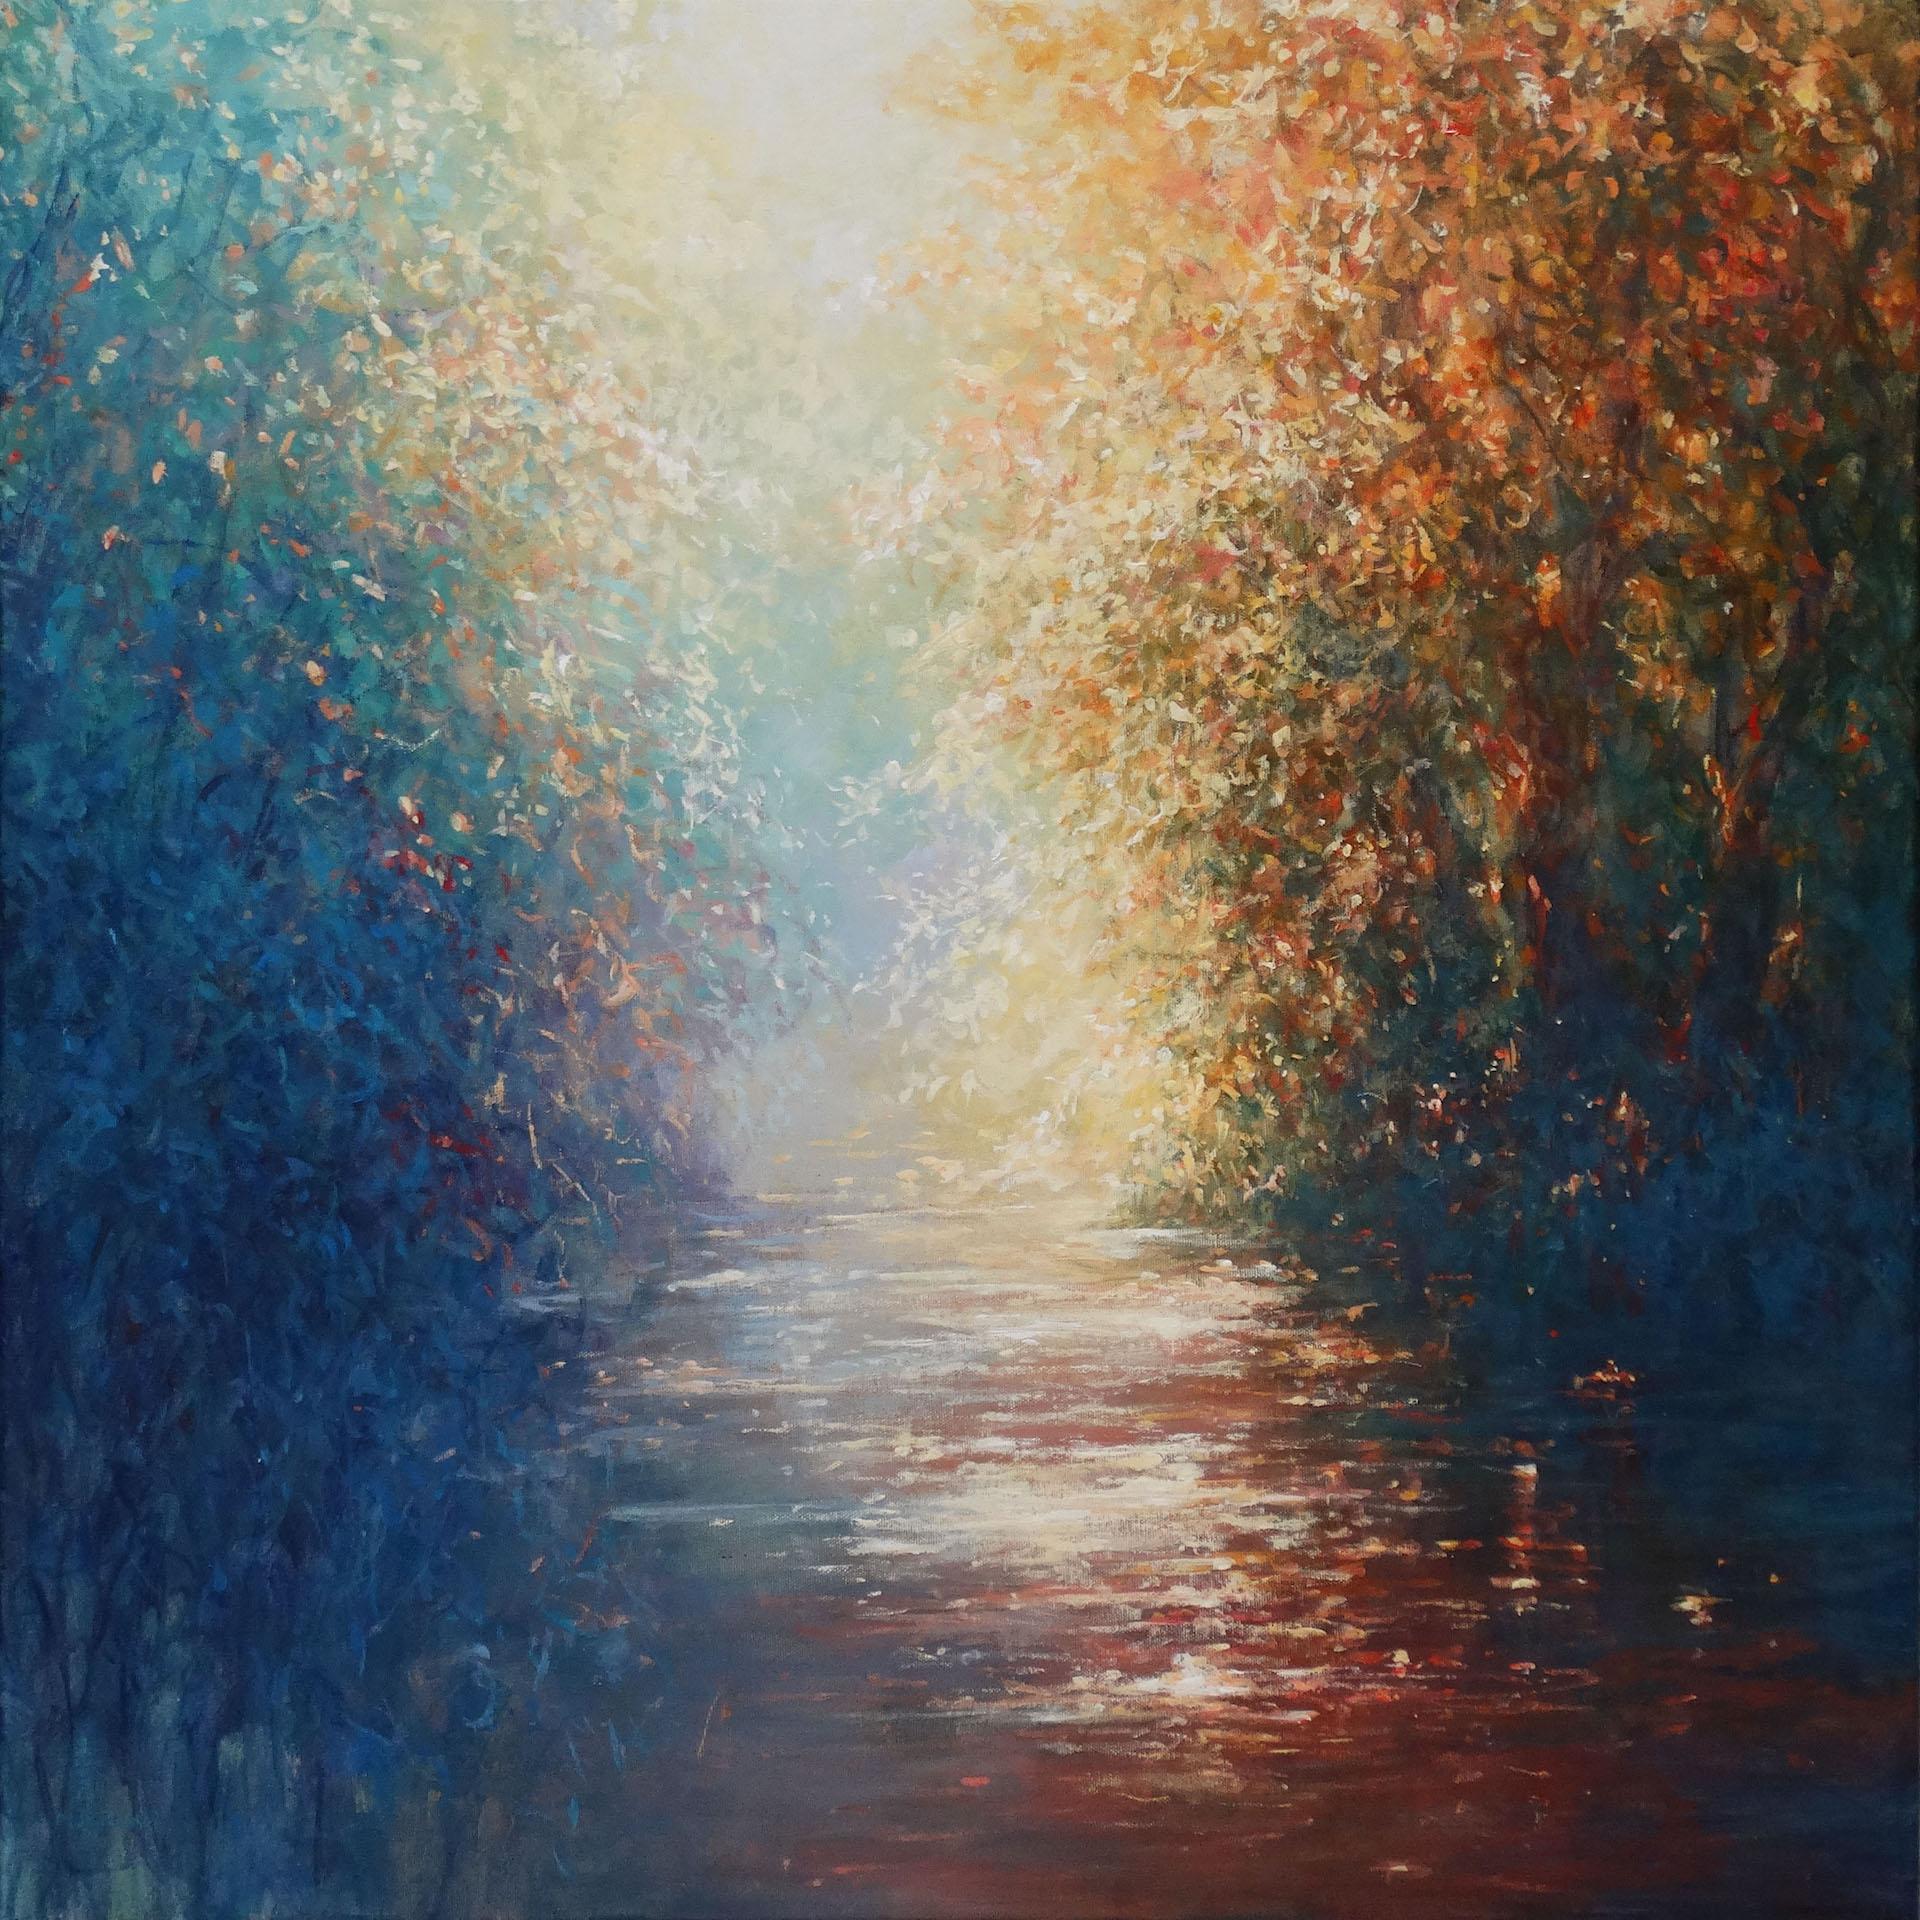 Secret River is an original painting by Mariusz Kaldowski. An atmospheric original painting of a forest river. This painting continues round the sides, as shown, ready to hang.
Mariusz Kaldowski is available with Wychwood Art online and in our